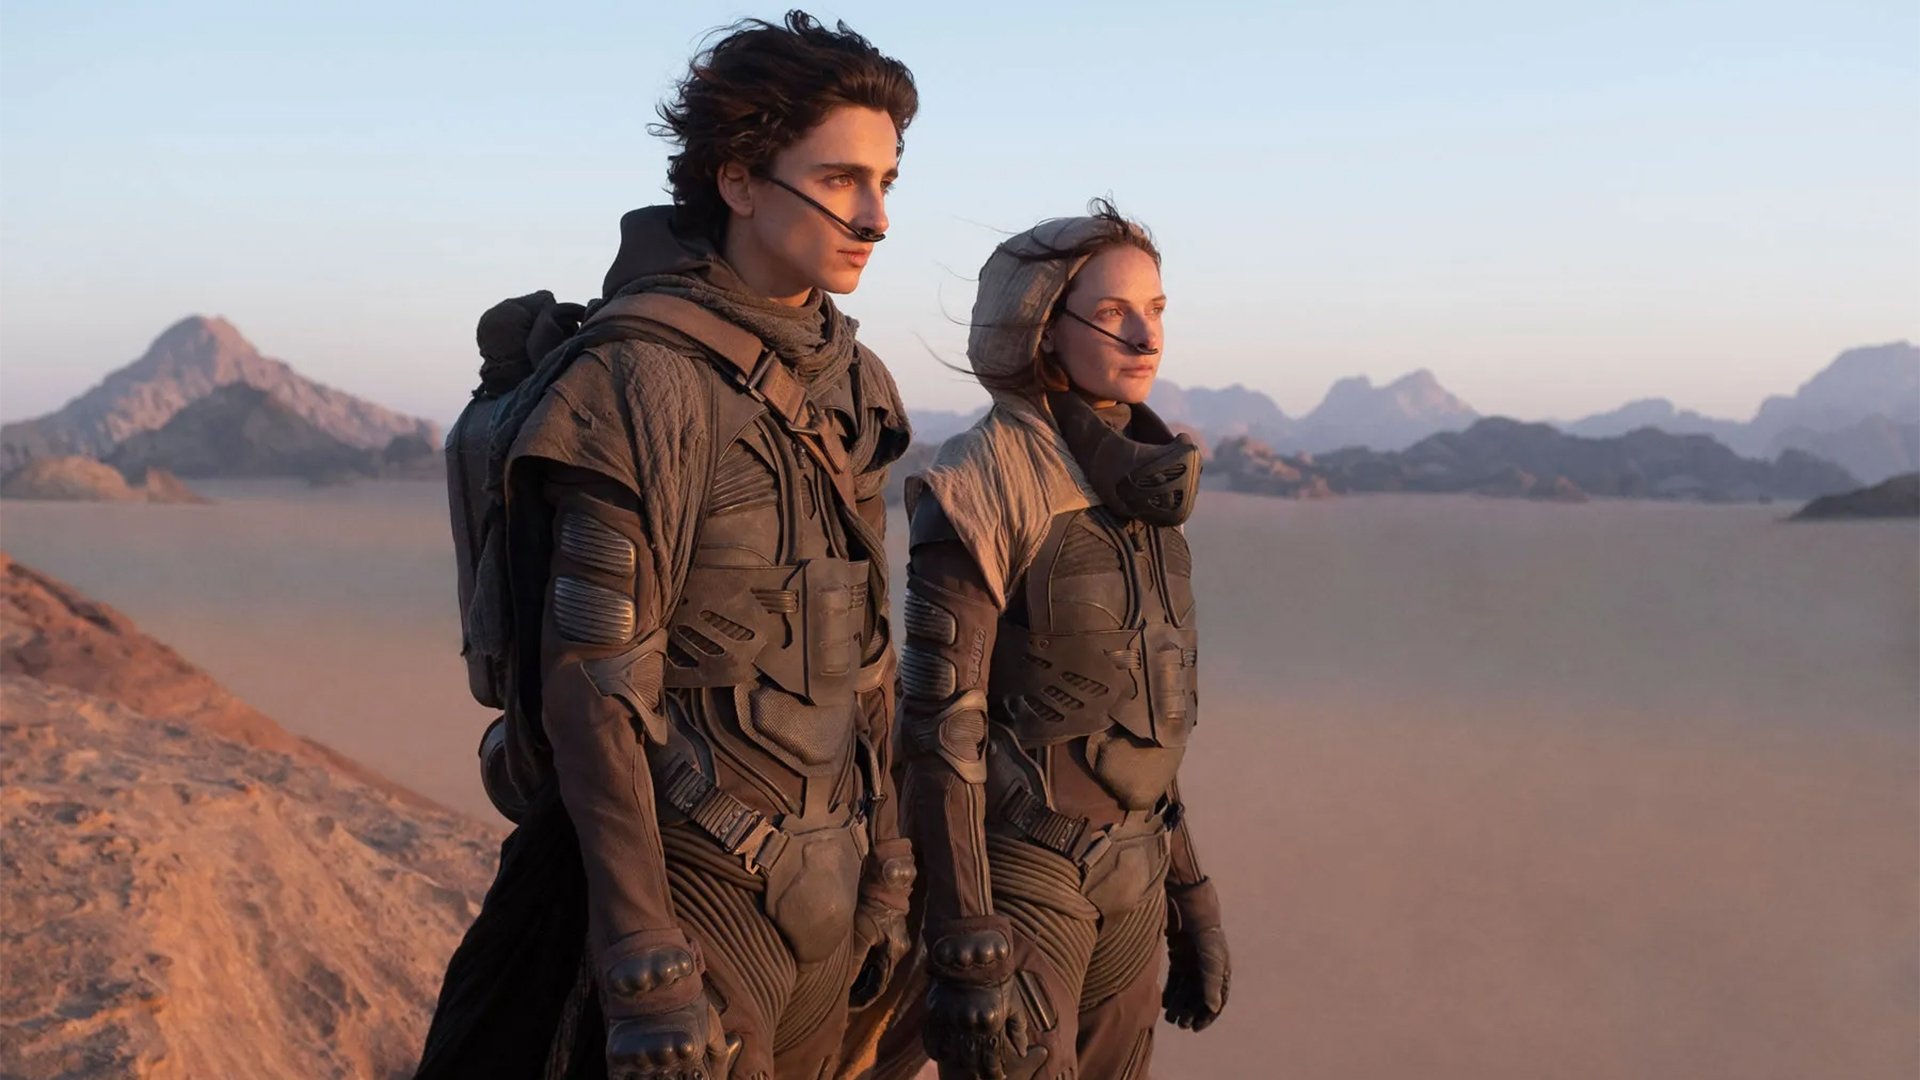 This image released by Legendary Pictures shows Timothee Chalamet (L) and Rebecca Ferguson in "Dune." (Photo courtesy of Legendary Pictures / Warner Bros)